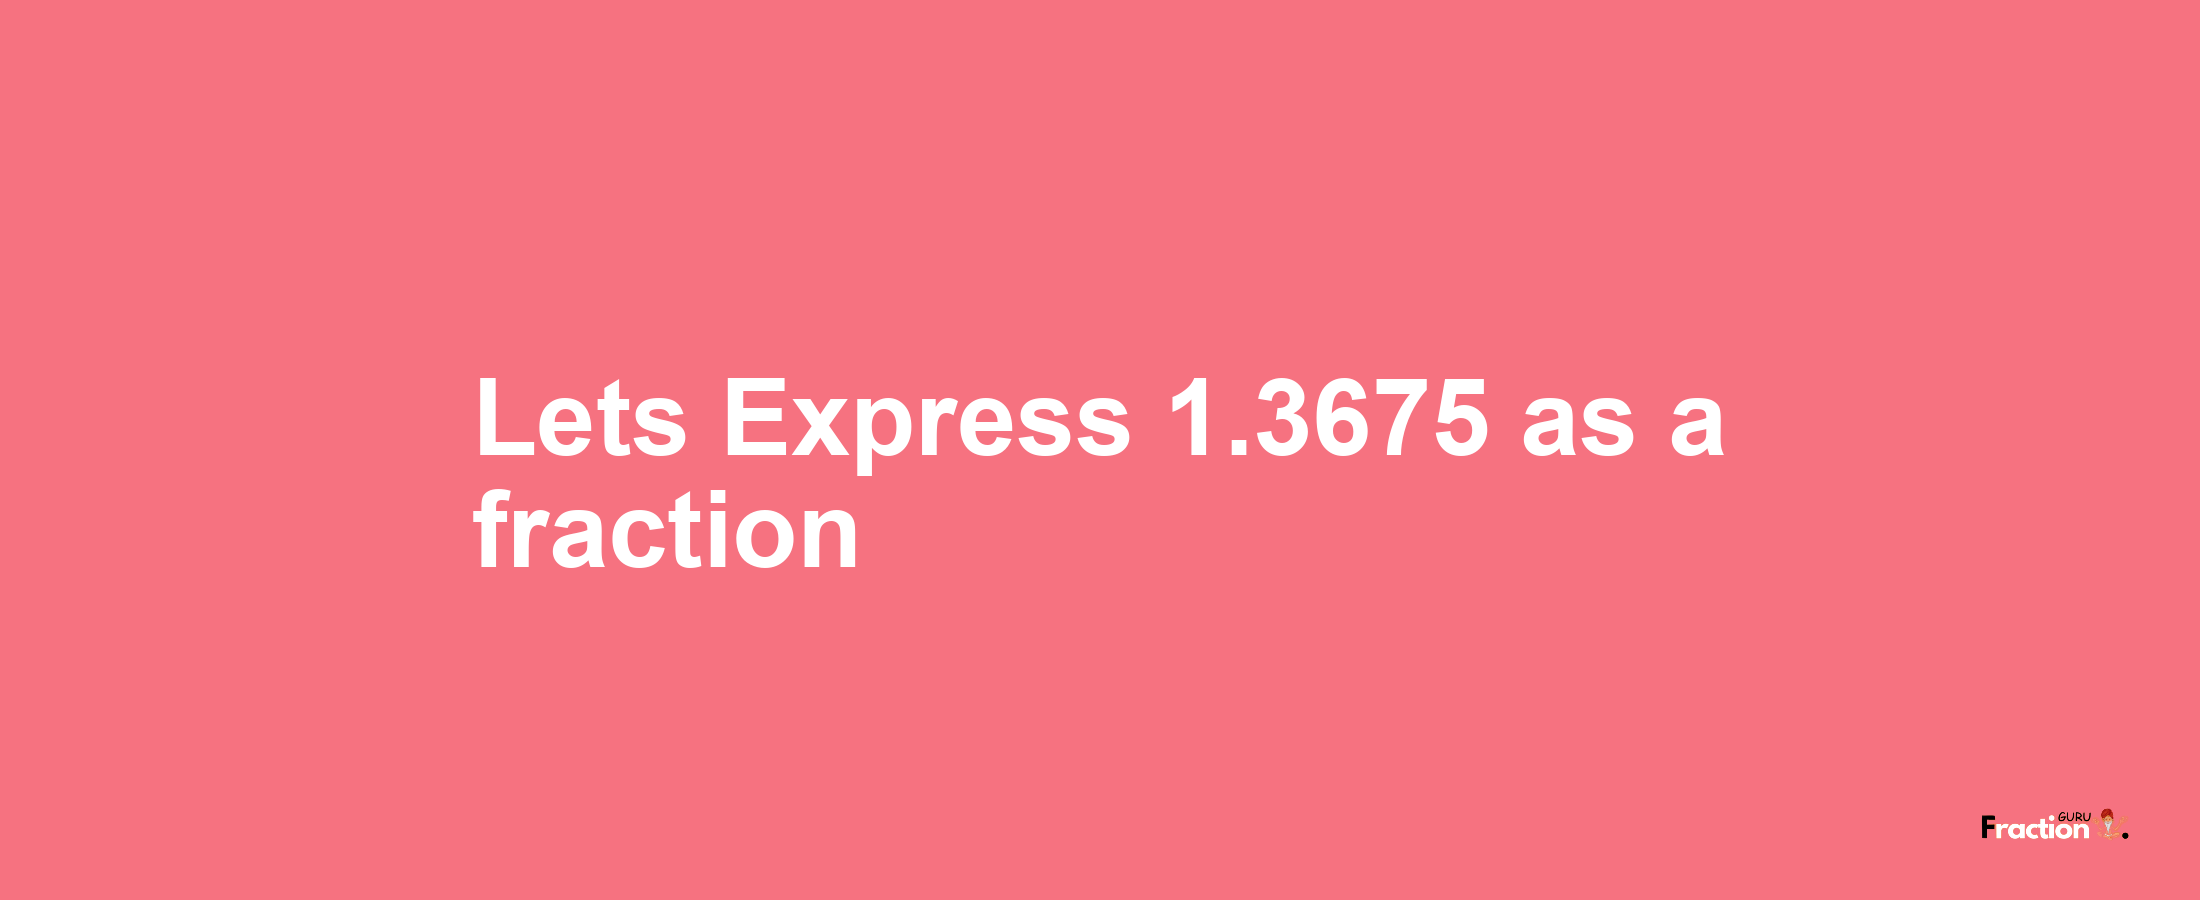 Lets Express 1.3675 as afraction